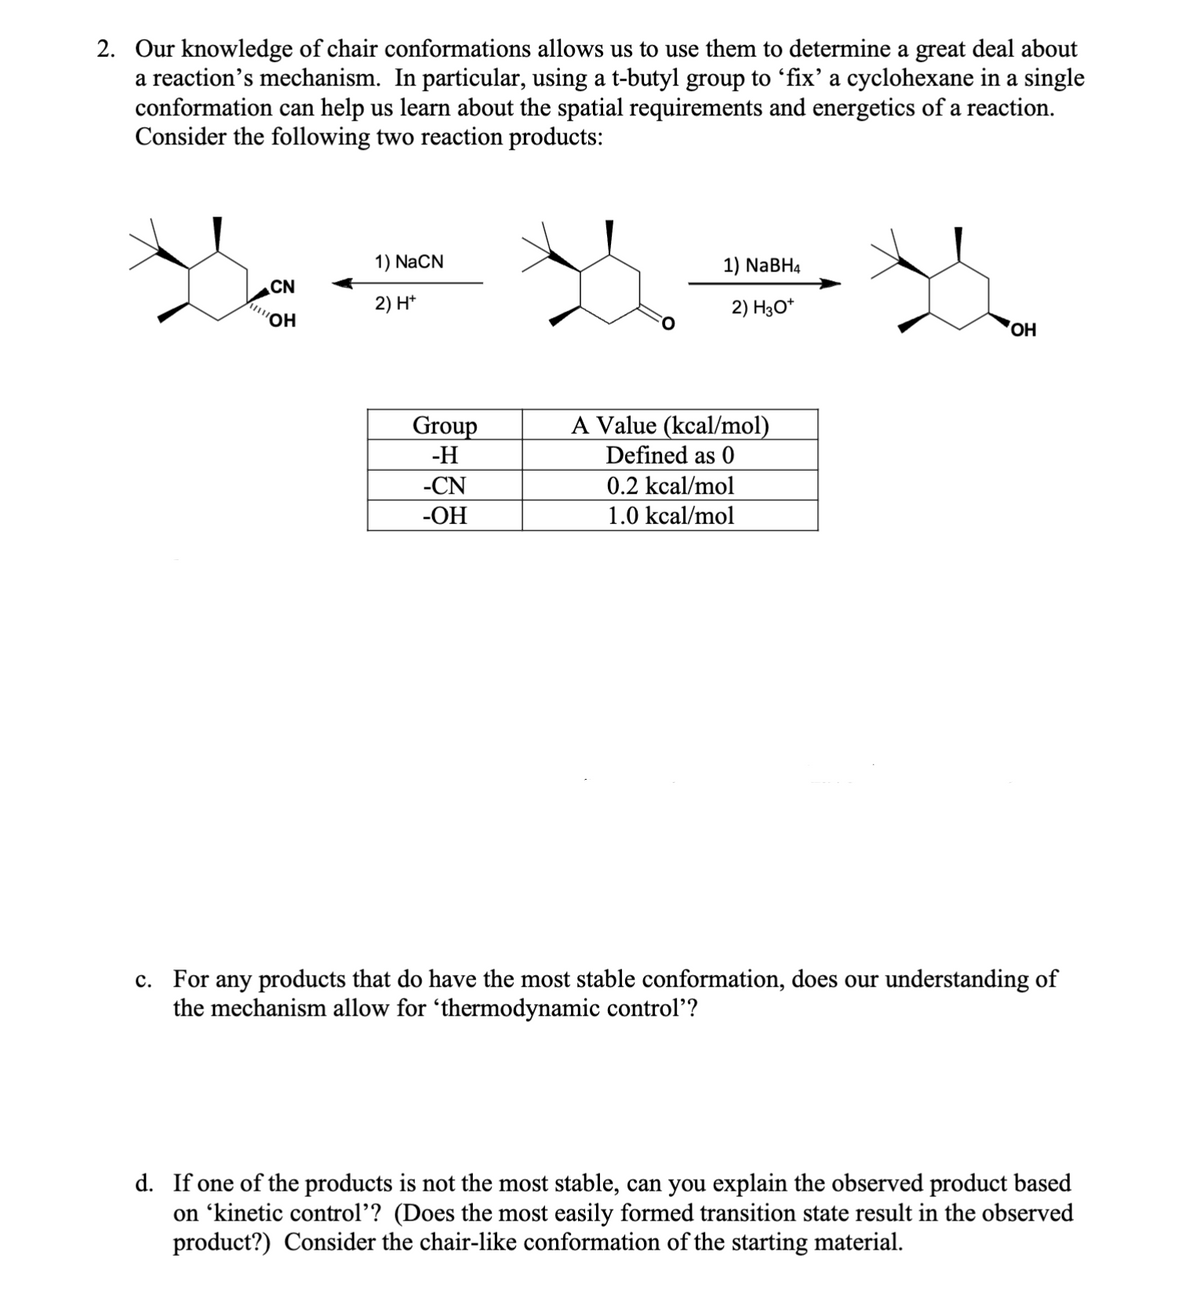 2. Our knowledge of chair conformations allows us to use them to determine a great deal about
a reaction's mechanism. In particular, using a t-butyl group to 'fix' a cyclohexane in a single
conformation can help us learn about the spatial requirements and energetics of a reaction.
Consider the following two reaction products:
CN
1) NaCN
2) H+
OH
1) NaBH4
2) H3O+
OH
Group
-H
-CN
A Value (kcal/mol)
Defined as 0
0.2 kcal/mol
-OH
1.0 kcal/mol
c. For any products that do have the most stable conformation, does our understanding of
the mechanism allow for ‘thermodynamic control'?
d. If one of the products is not the most stable, can you explain the observed product based
on ‘kinetic control'? (Does the most easily formed transition state result in the observed
product?) Consider the chair-like conformation of the starting material.